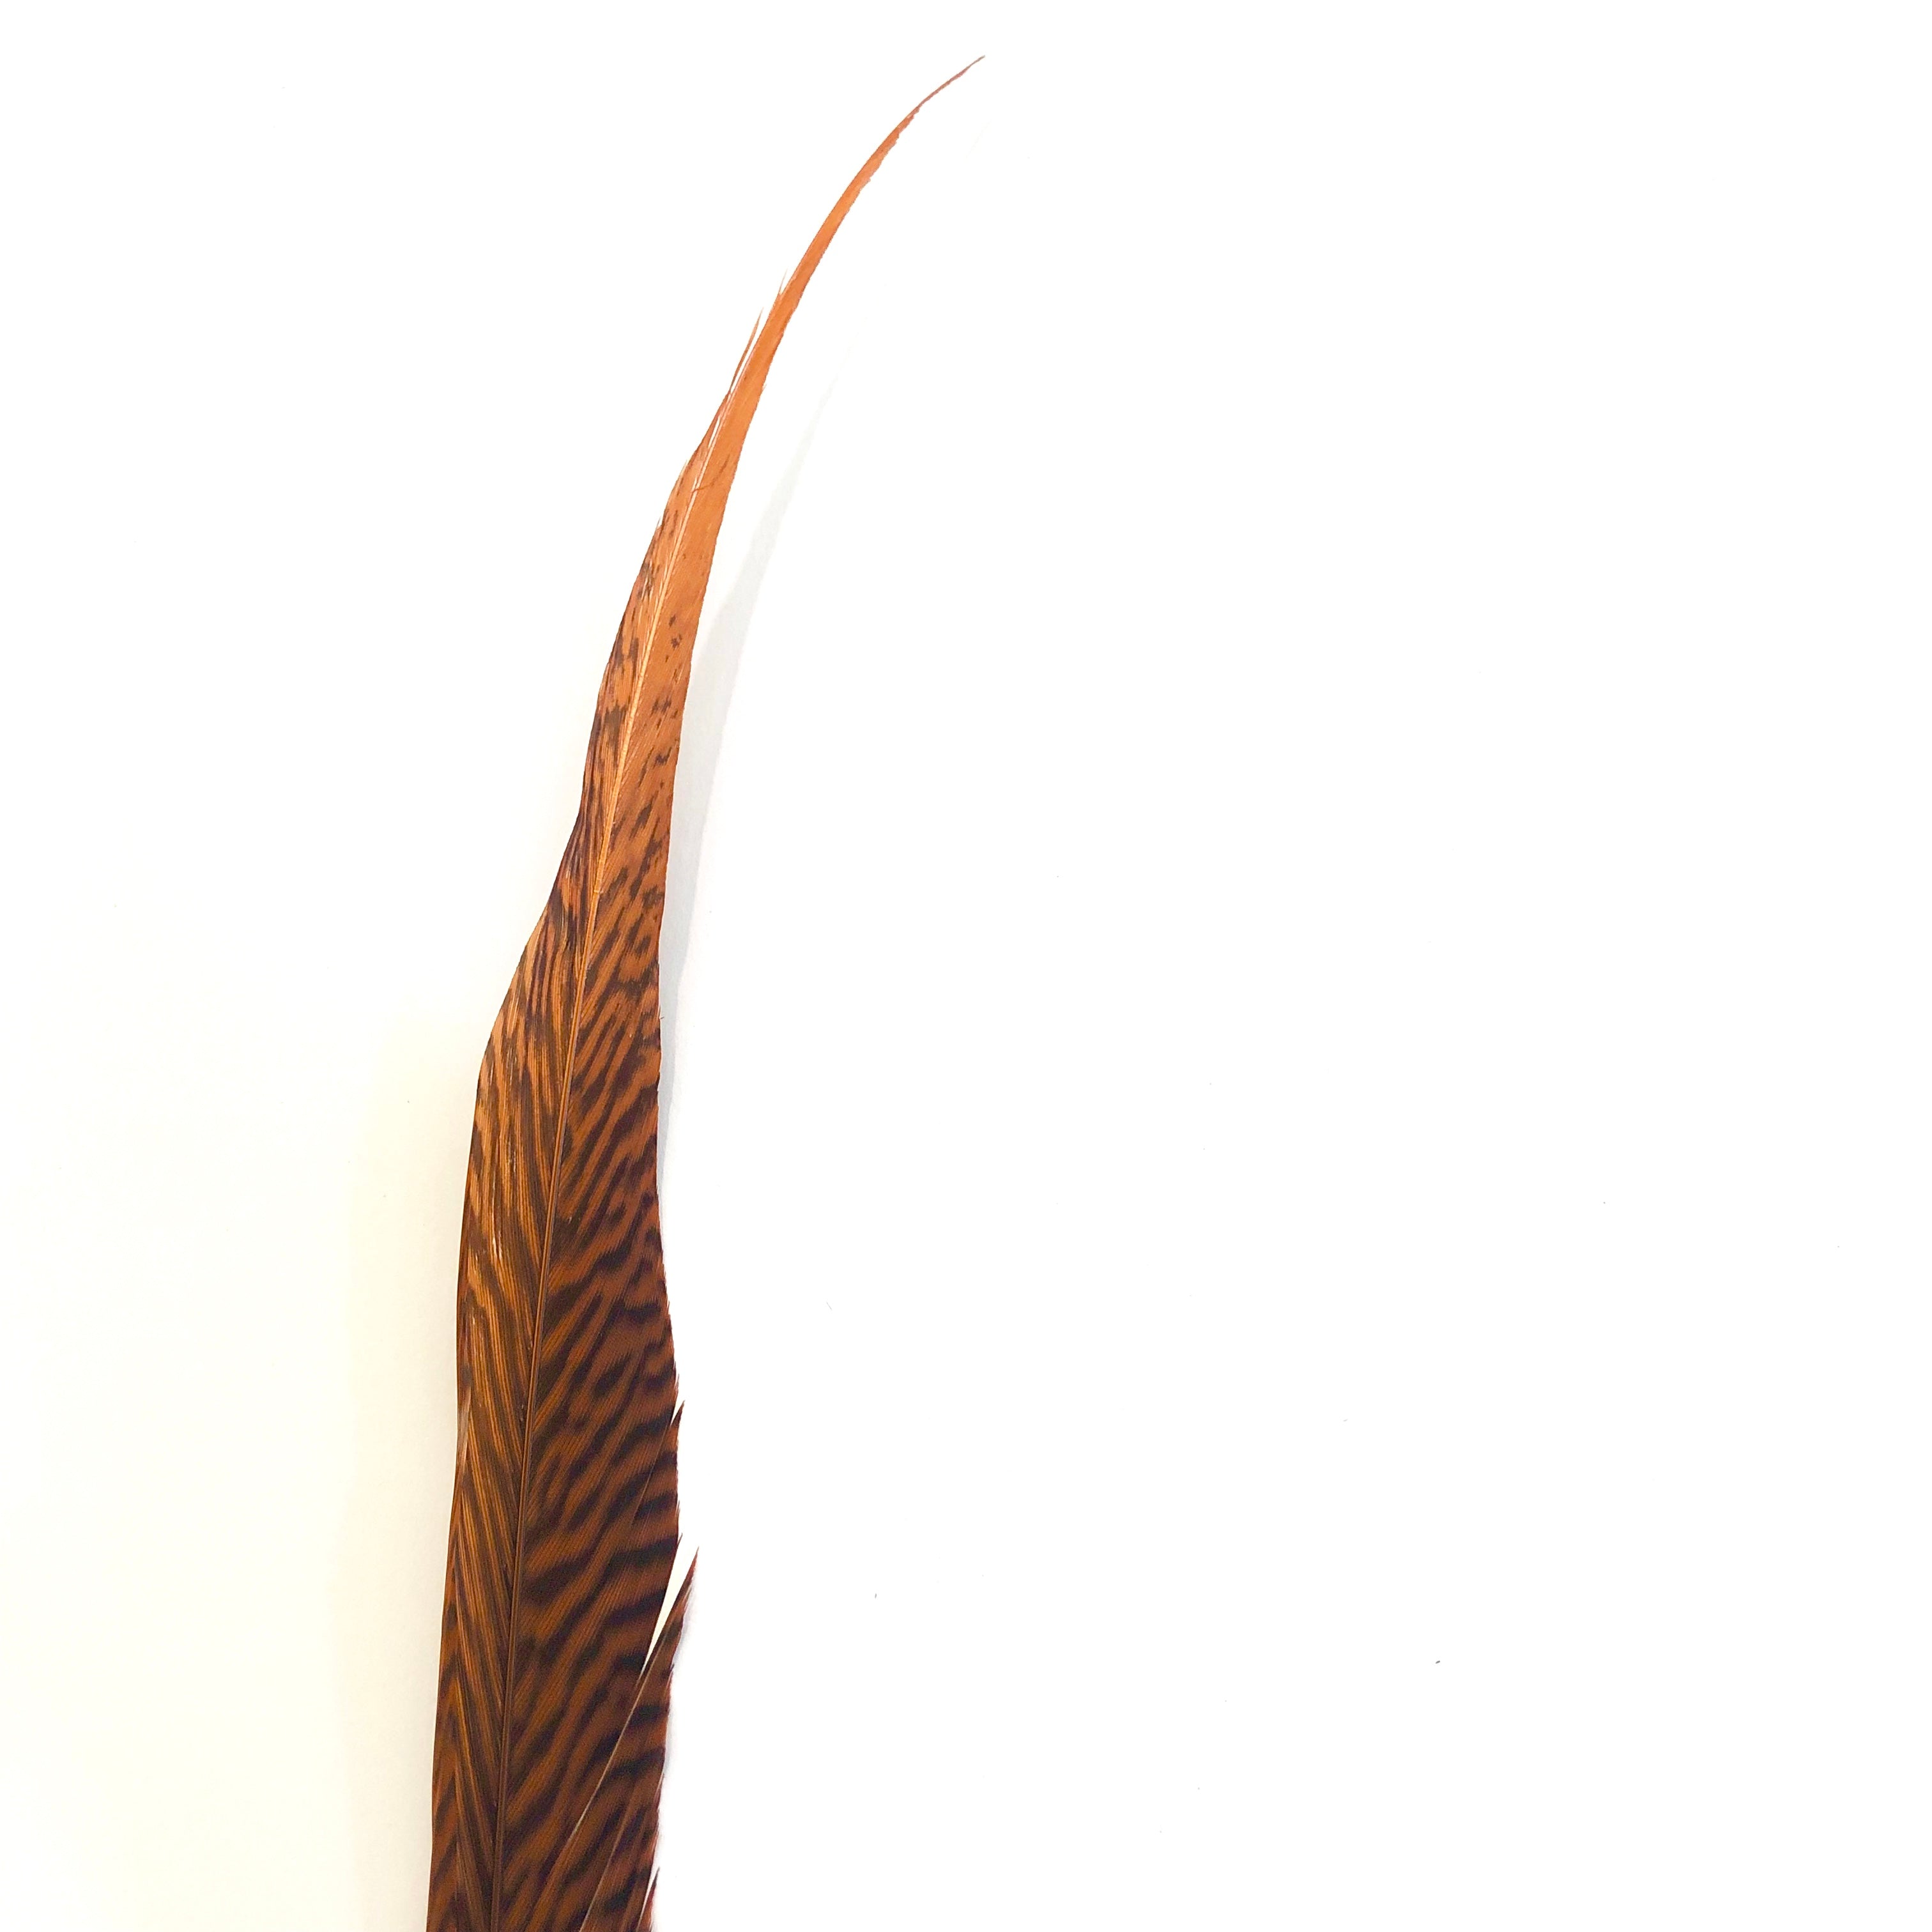 10" to 20" Golden Pheasant Side Tail Feather - Orange ((SECONDS))